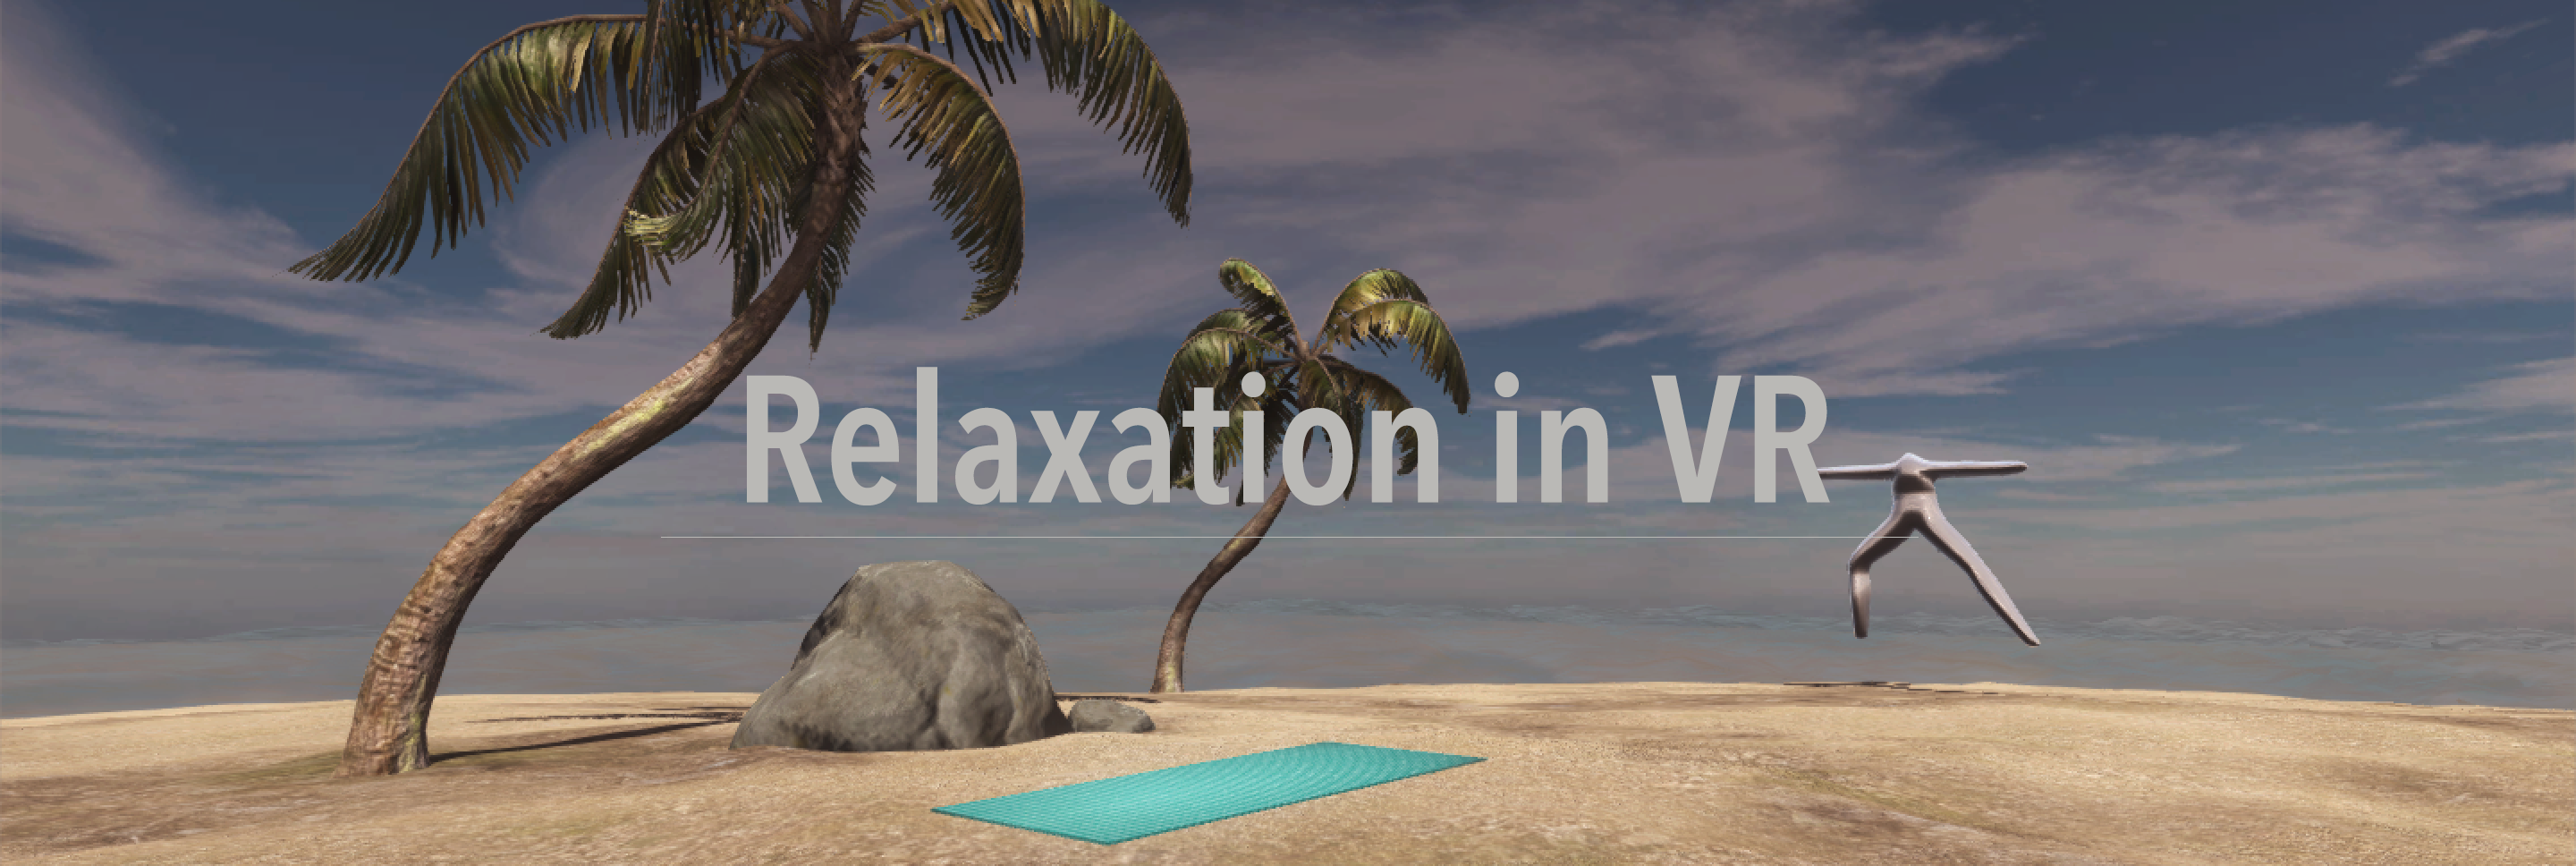 Relaxation in VR